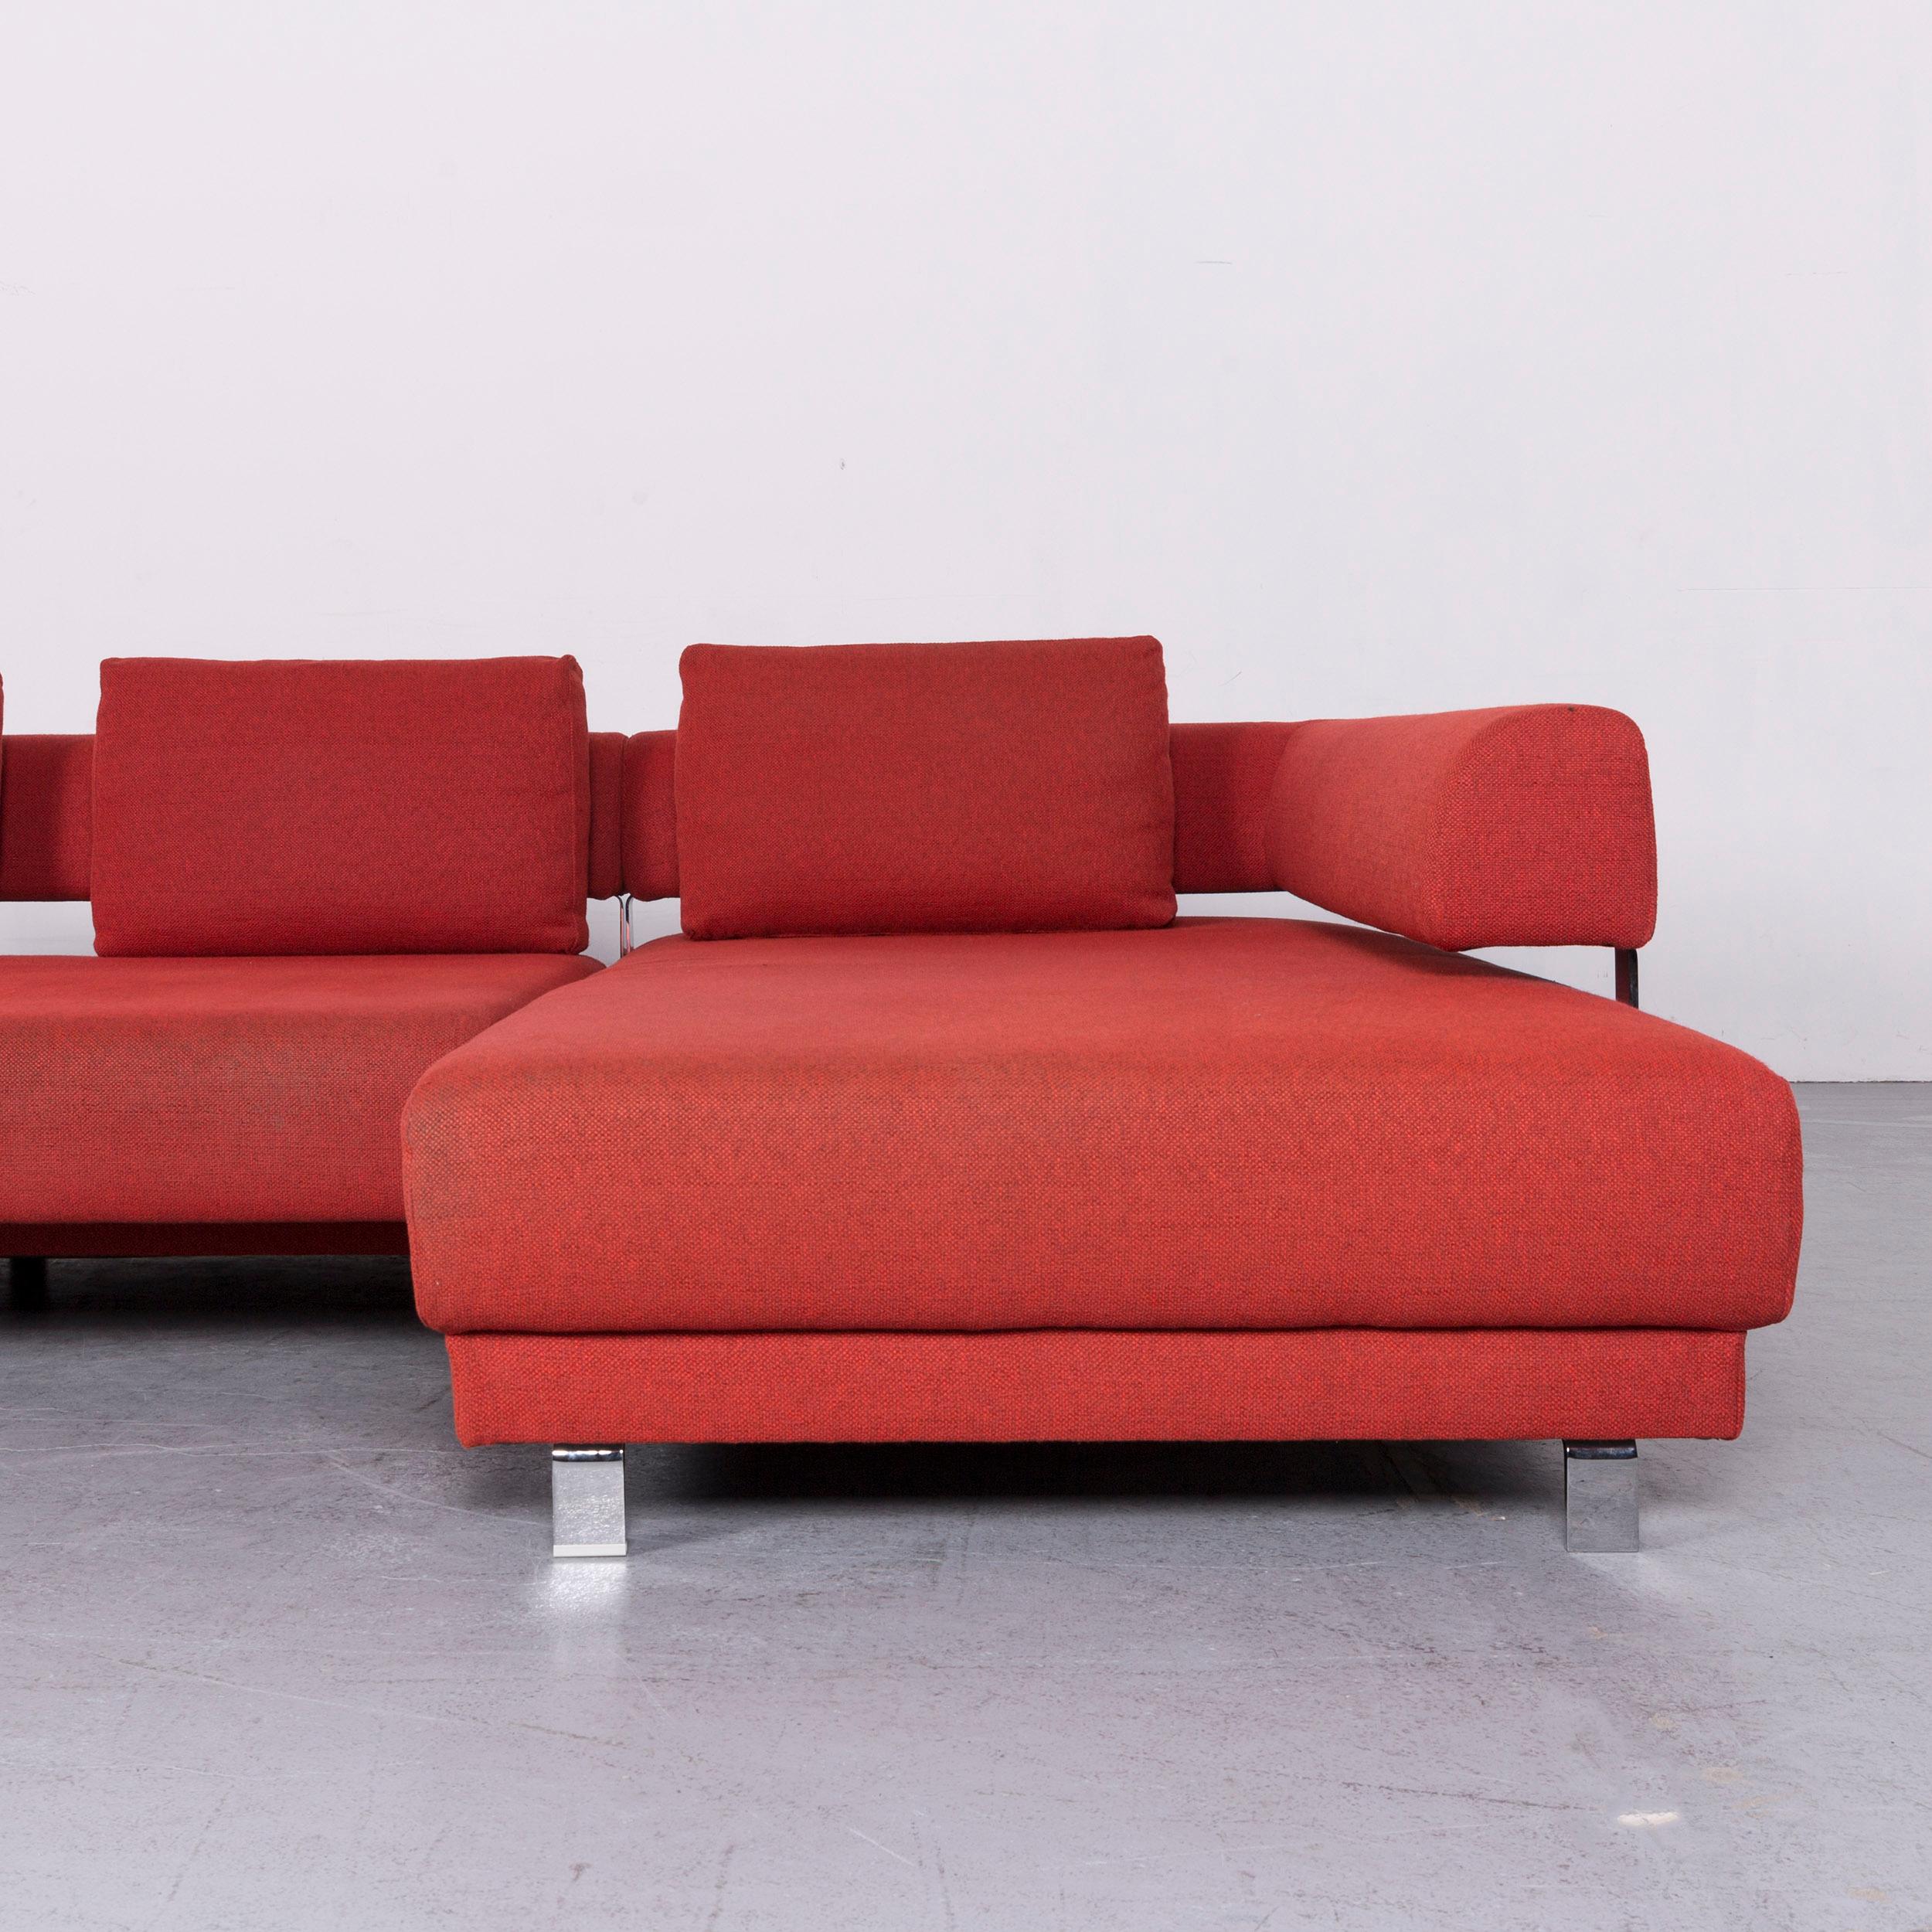 Ewald Schillig Brand Face Designer Sofa Footstool Set Fabric Red Corner Couch In Good Condition For Sale In Cologne, DE